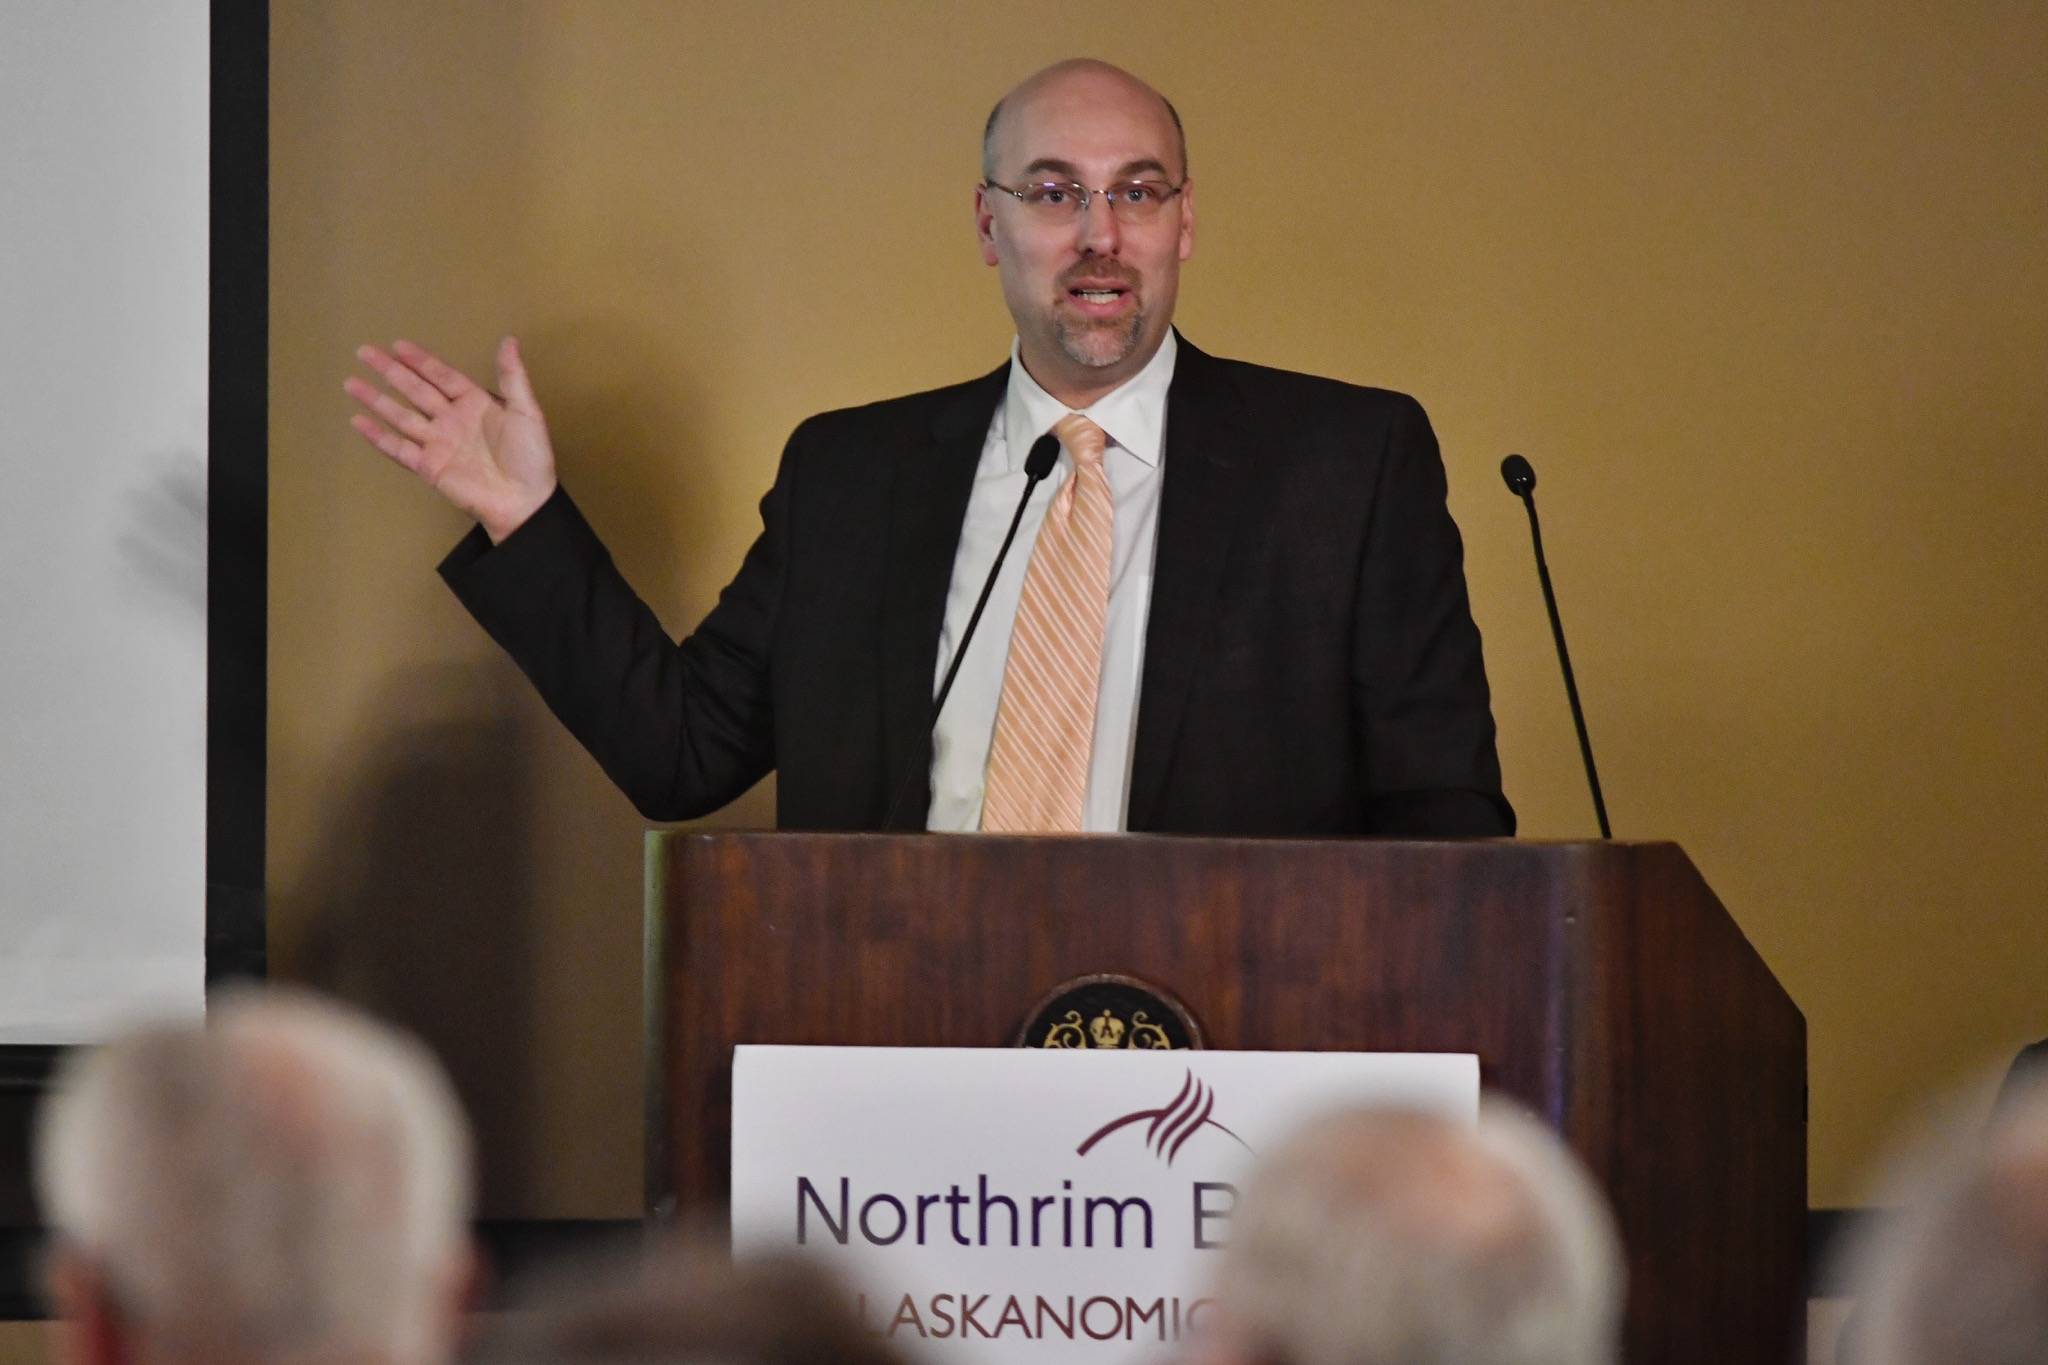 Mark Edwards, an economist with Northrim Bank, speaks about the health of Alaska’s economy during the 2019 Alaska Economic Luncheon sponsored by Northrim Bank at the Baranof Hotel on Monday, April 15, 2019. (Michael Penn | Juneau Empire)